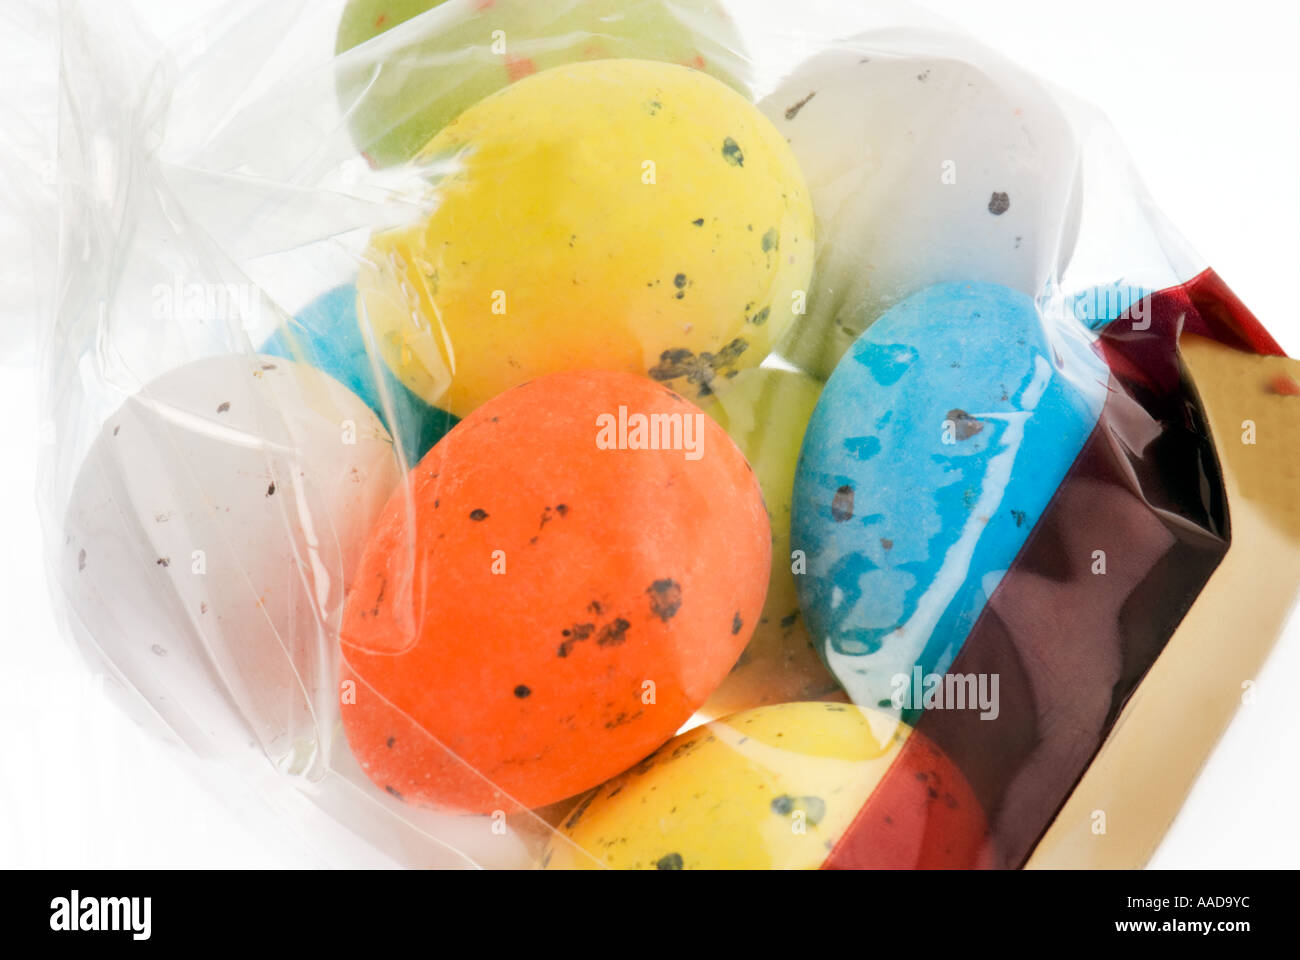 sugar coated chacolate easter eggs sugar candy cellophane packaged in shrill colors Stock Photo